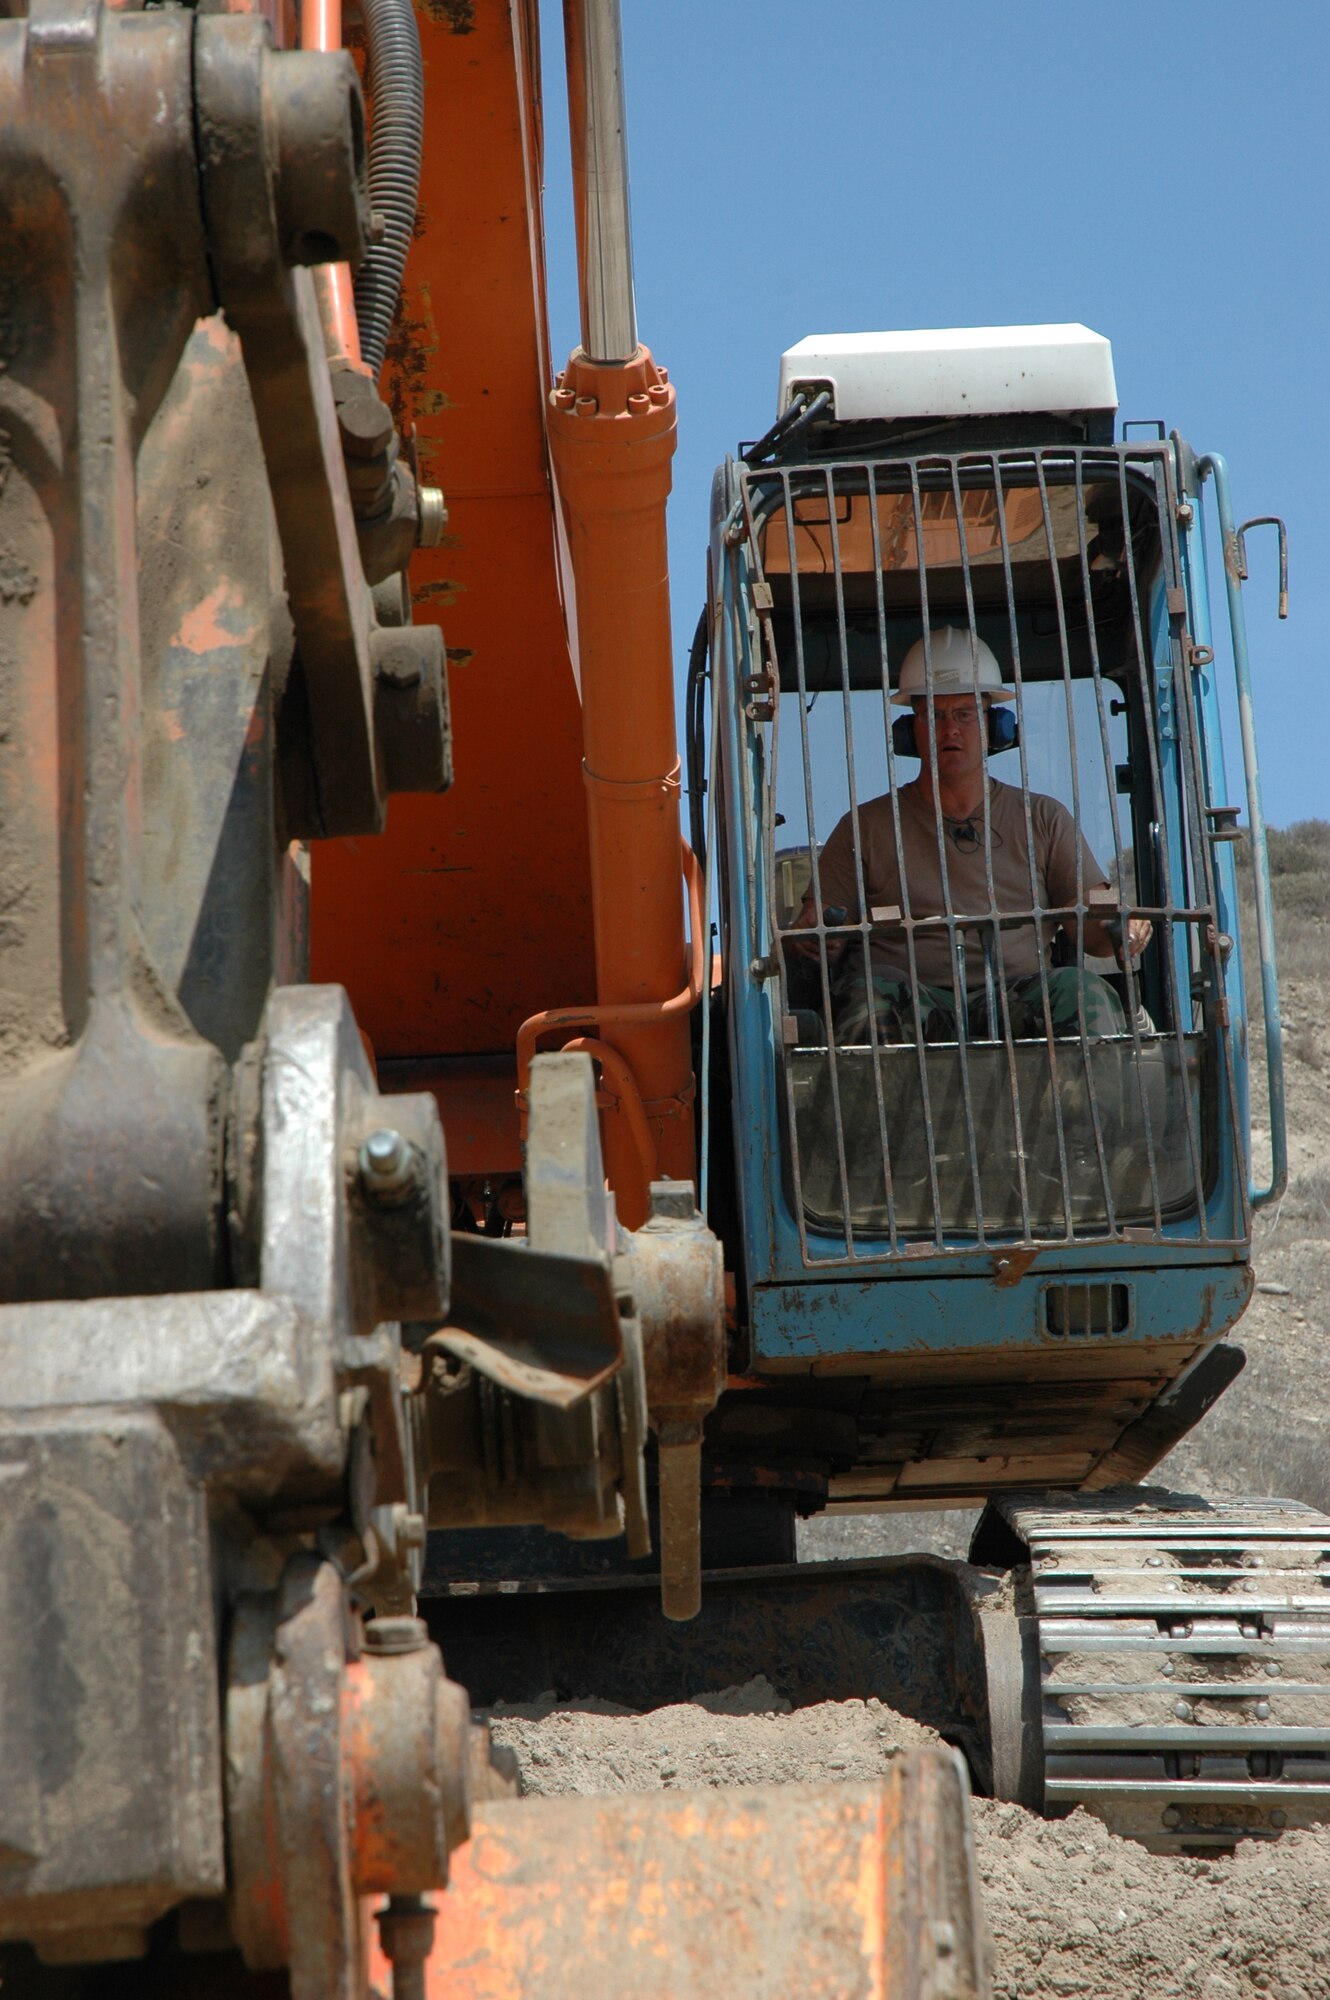 Heavy Equipment Operator Tech. Sgt. Kevin Maier, California Air National Guard civil engineer,  works an excavator at the road raising job site.  (U.S. Air Force photo by Lt. Col. Mark Moritz, 163 ARW)